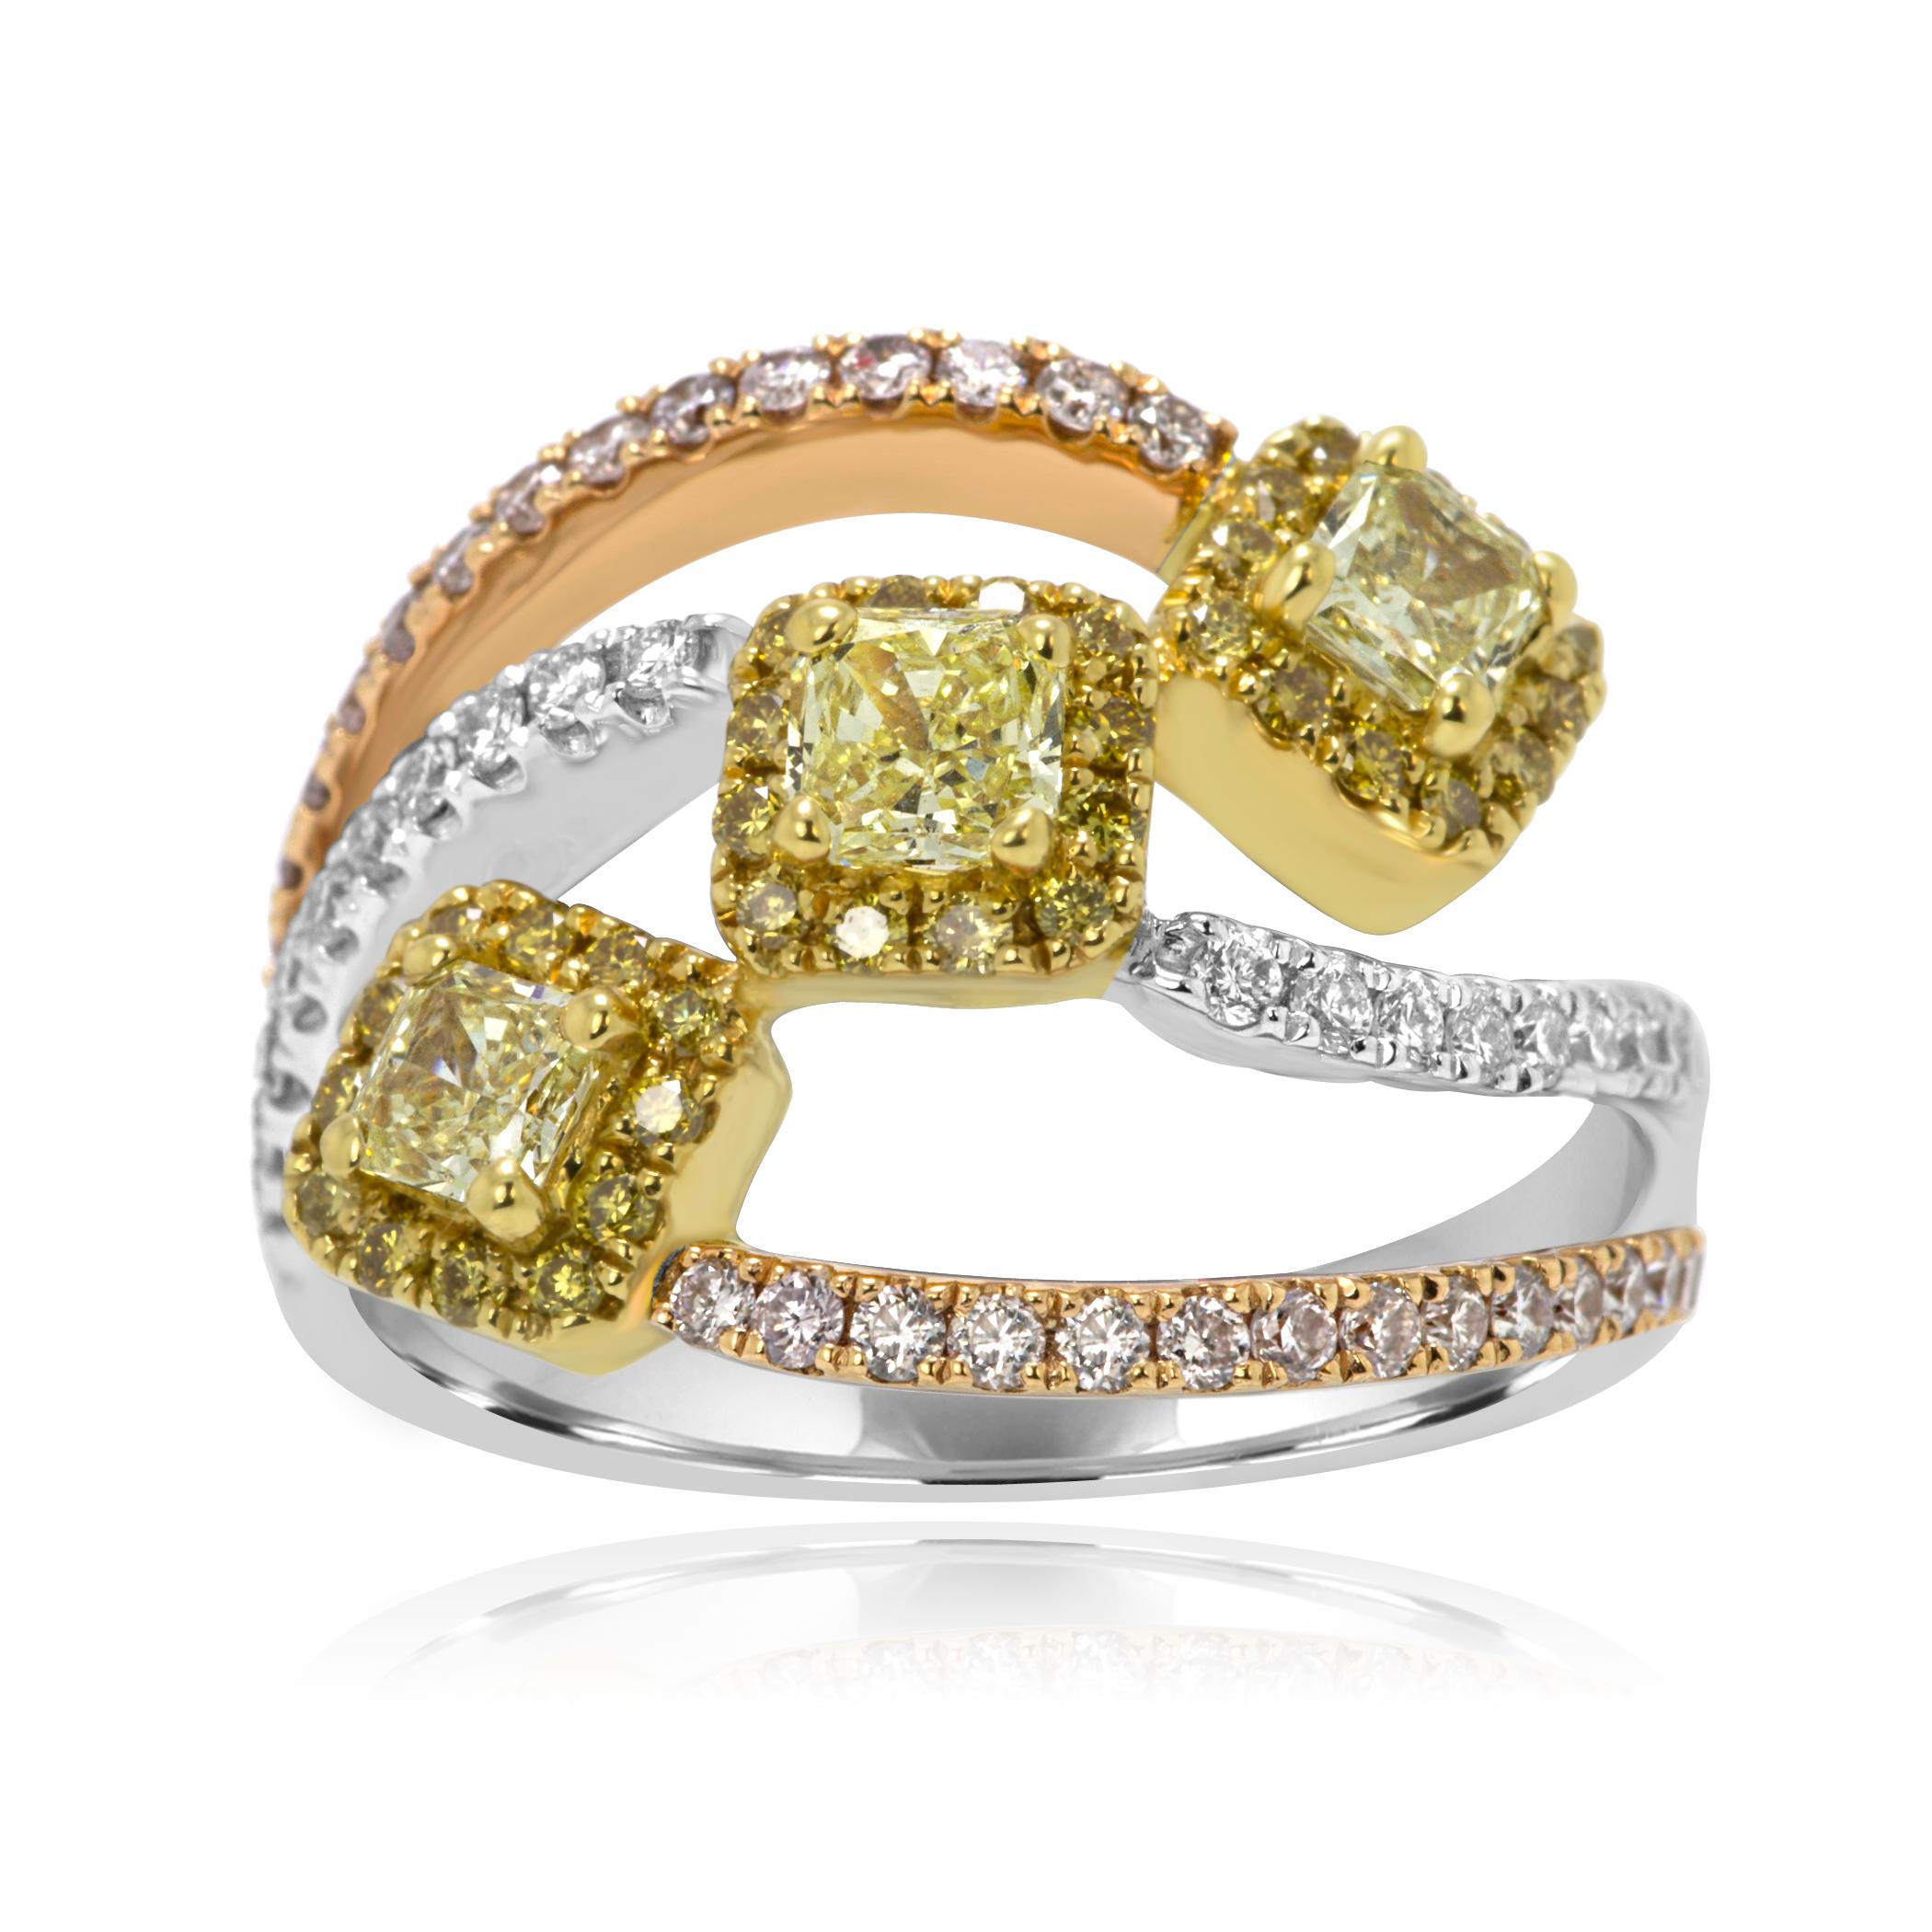 Stunning Three Stone Cocktail ring with 3 Natural Fancy Yellow Radiant Cut Diamonds 0.74 Carat Encircled in a Halo of Natural Fancy Yellow Round Diamonds 0.20 Carat with 2 Rows of Natural Pink Diamond Rounds 0.36 Carat on Side and One Row of White